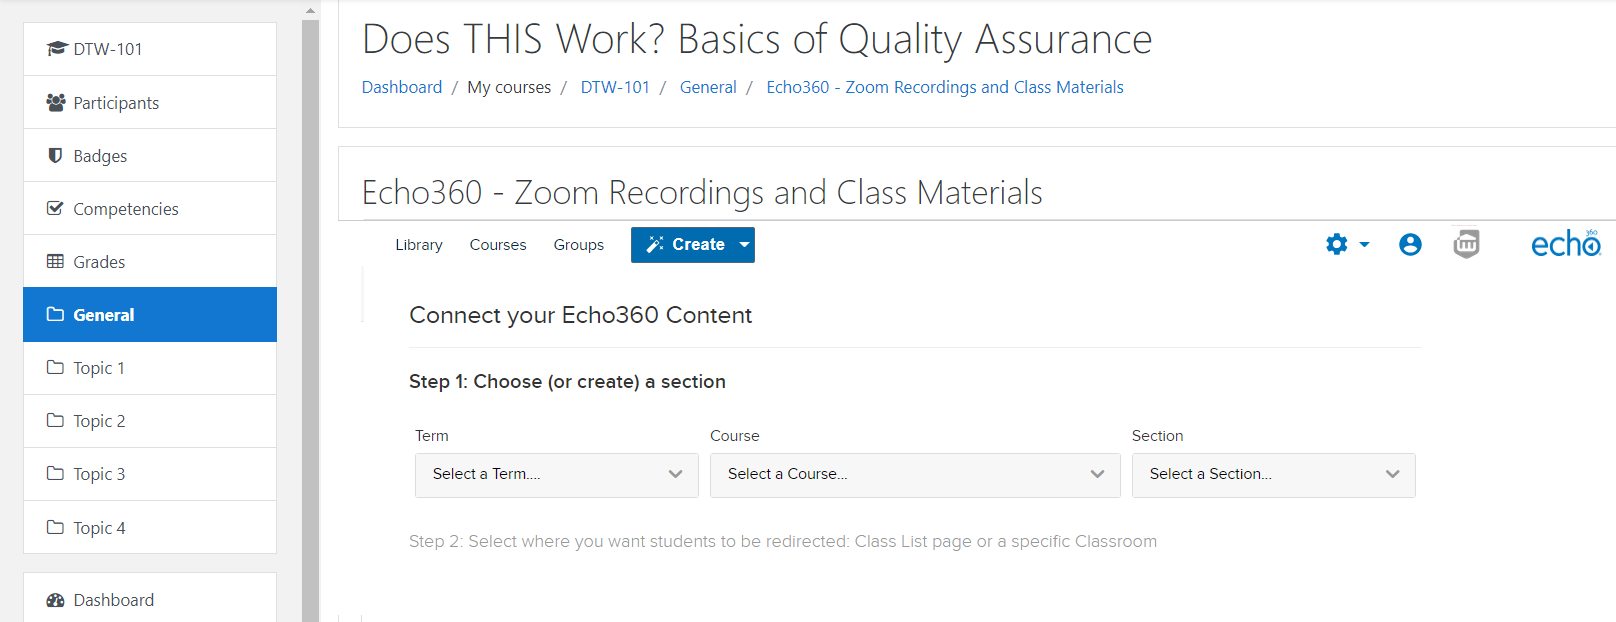 Moodle course with Echo link selected and mapping options to Echo section shown as described